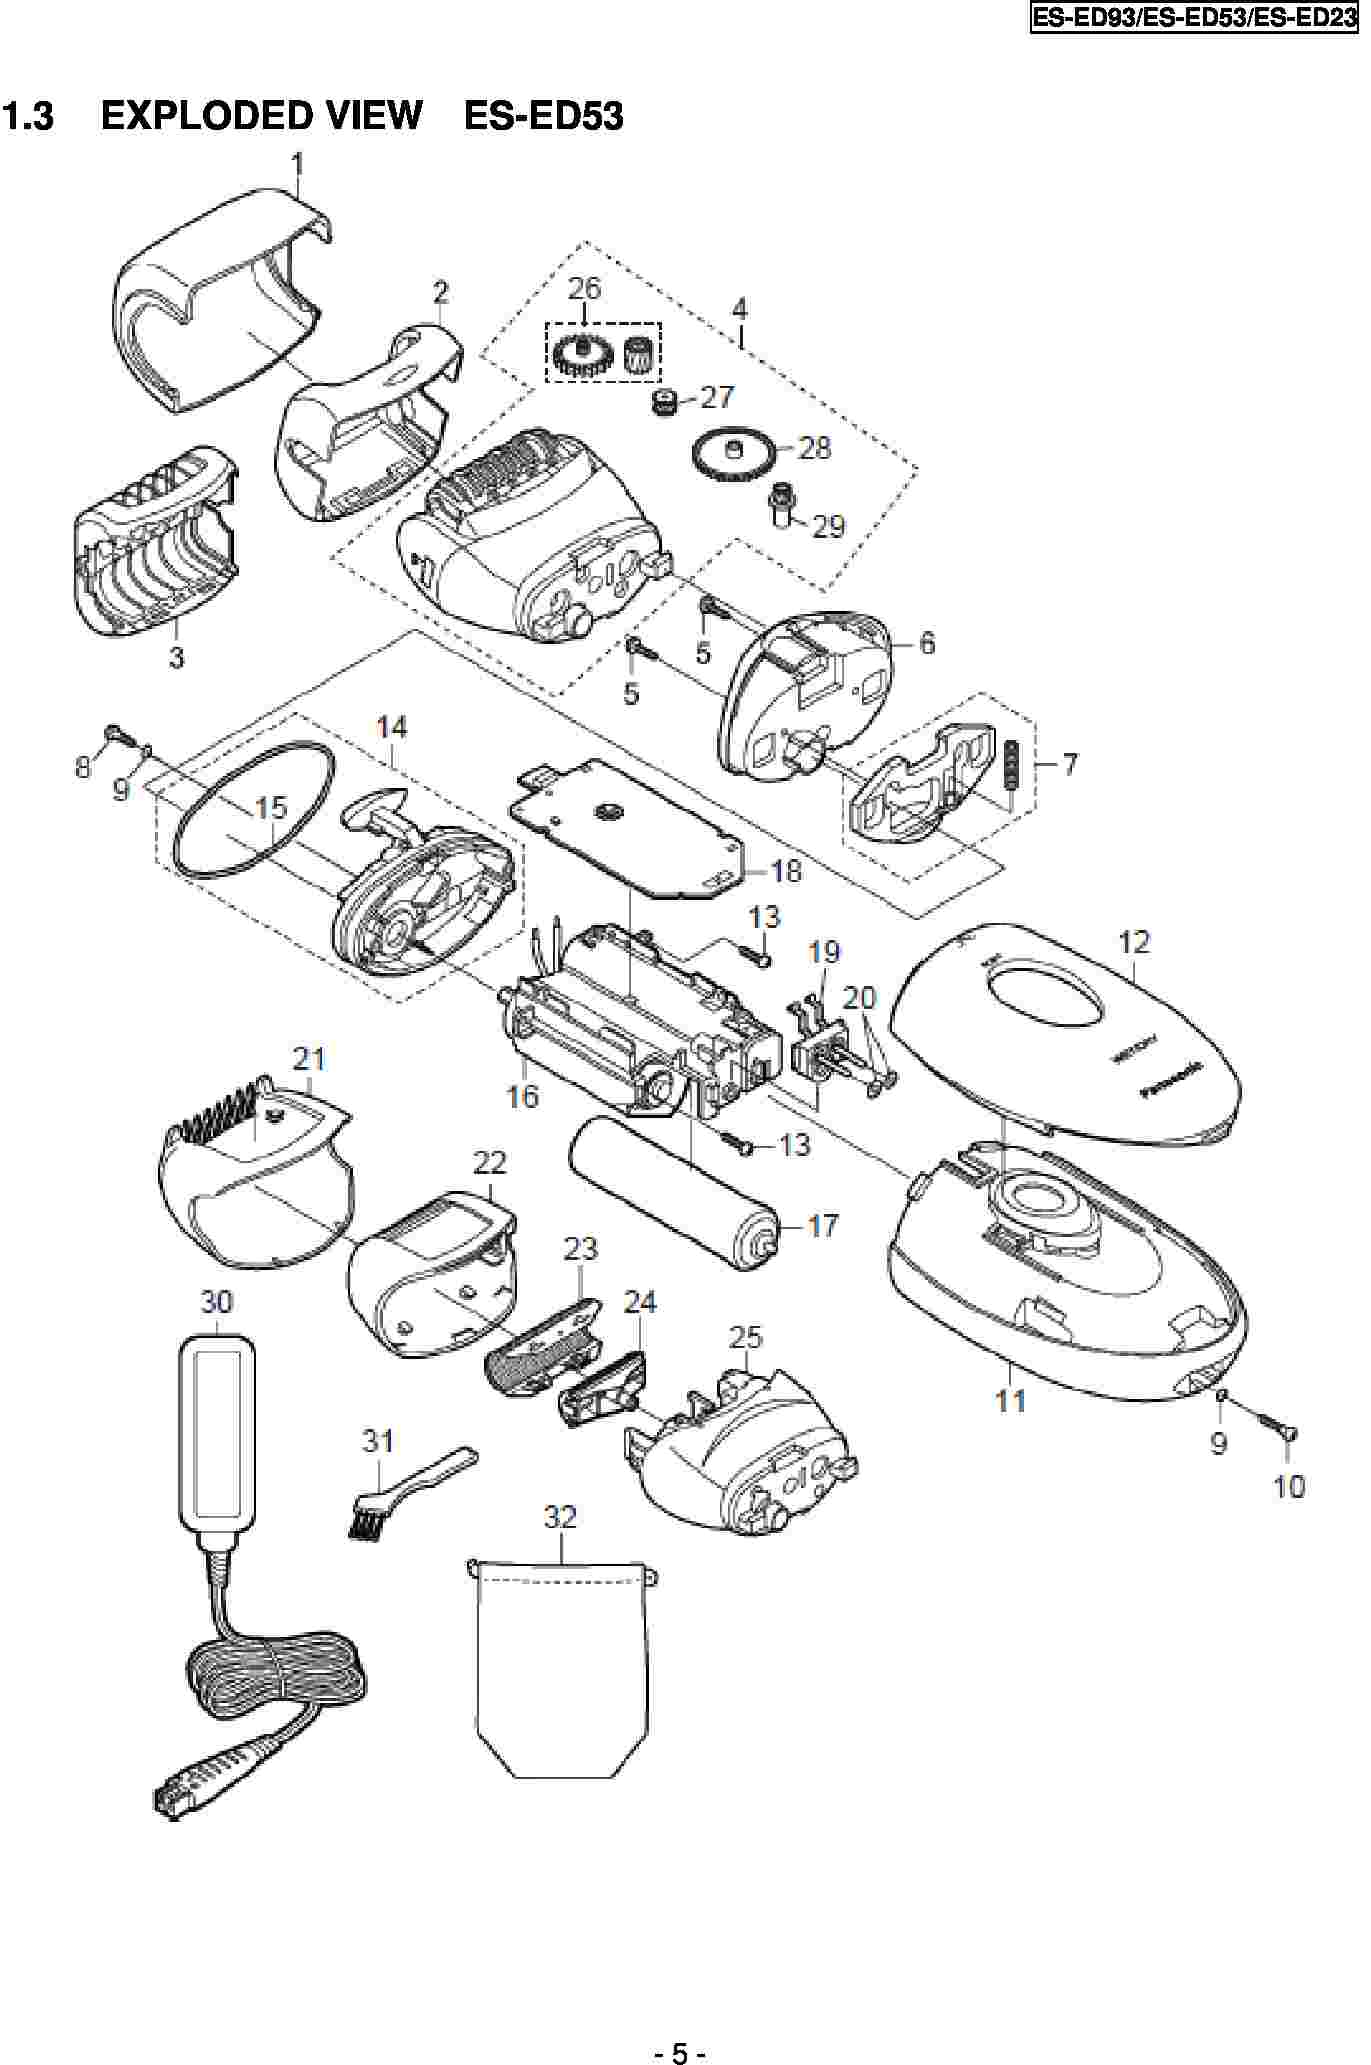 ES-ED53: Exploded View